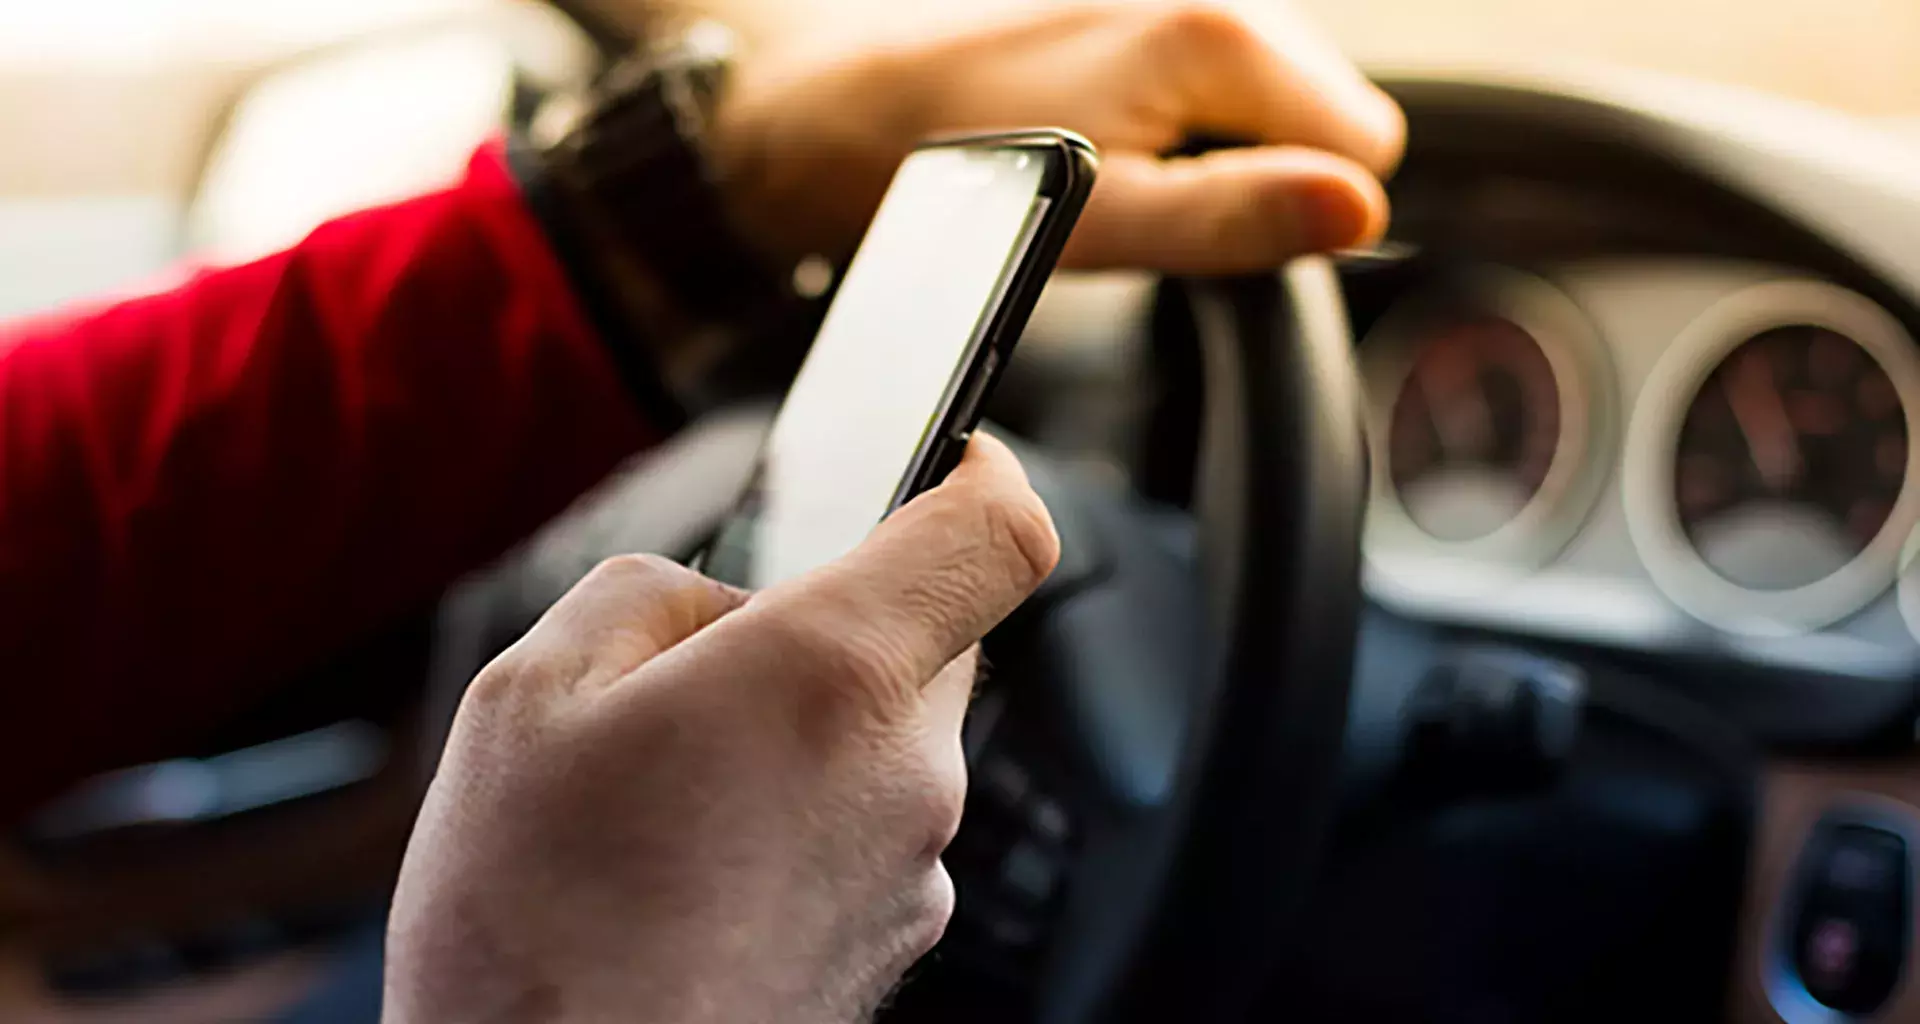 Texting while driving? There’s an algorithm to stop you doing it